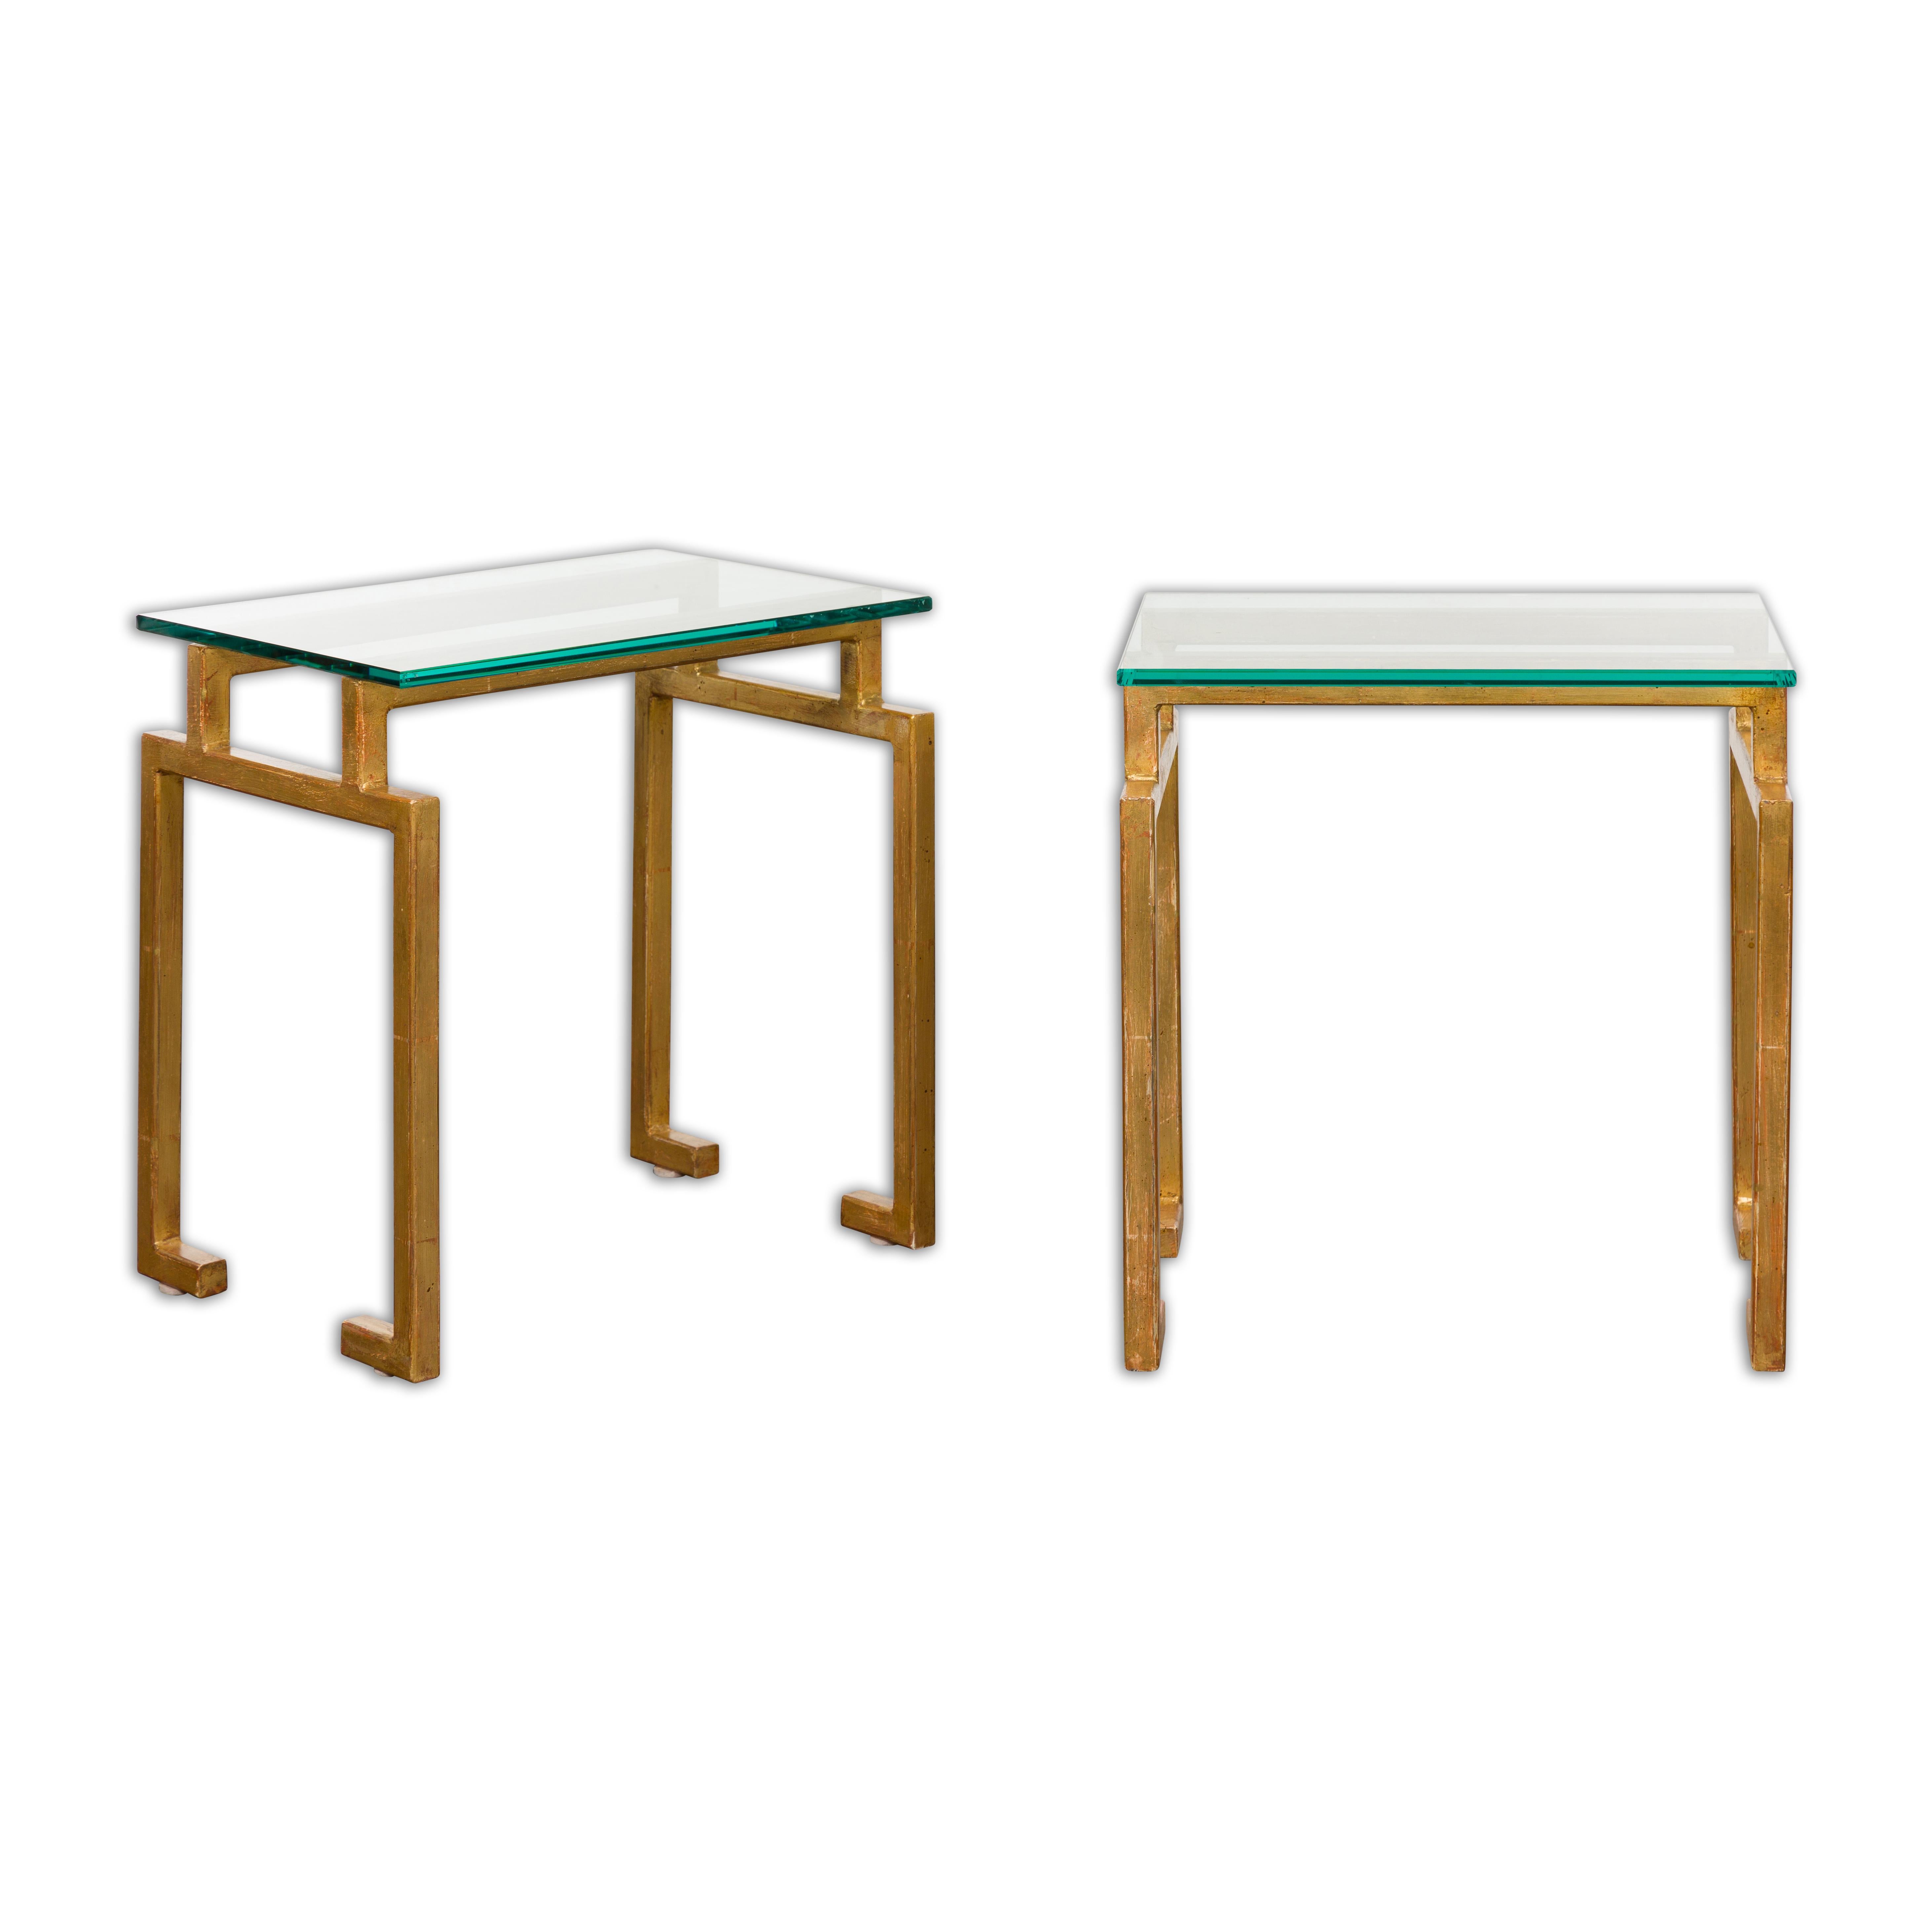 A pair of Italian Midcentury gilt metal side tables with rectangular glass tops and linear silhouettes. Transform your living space with the luxurious addition of these Italian Midcentury gilt metal side tables, a true testament to the lavish yet